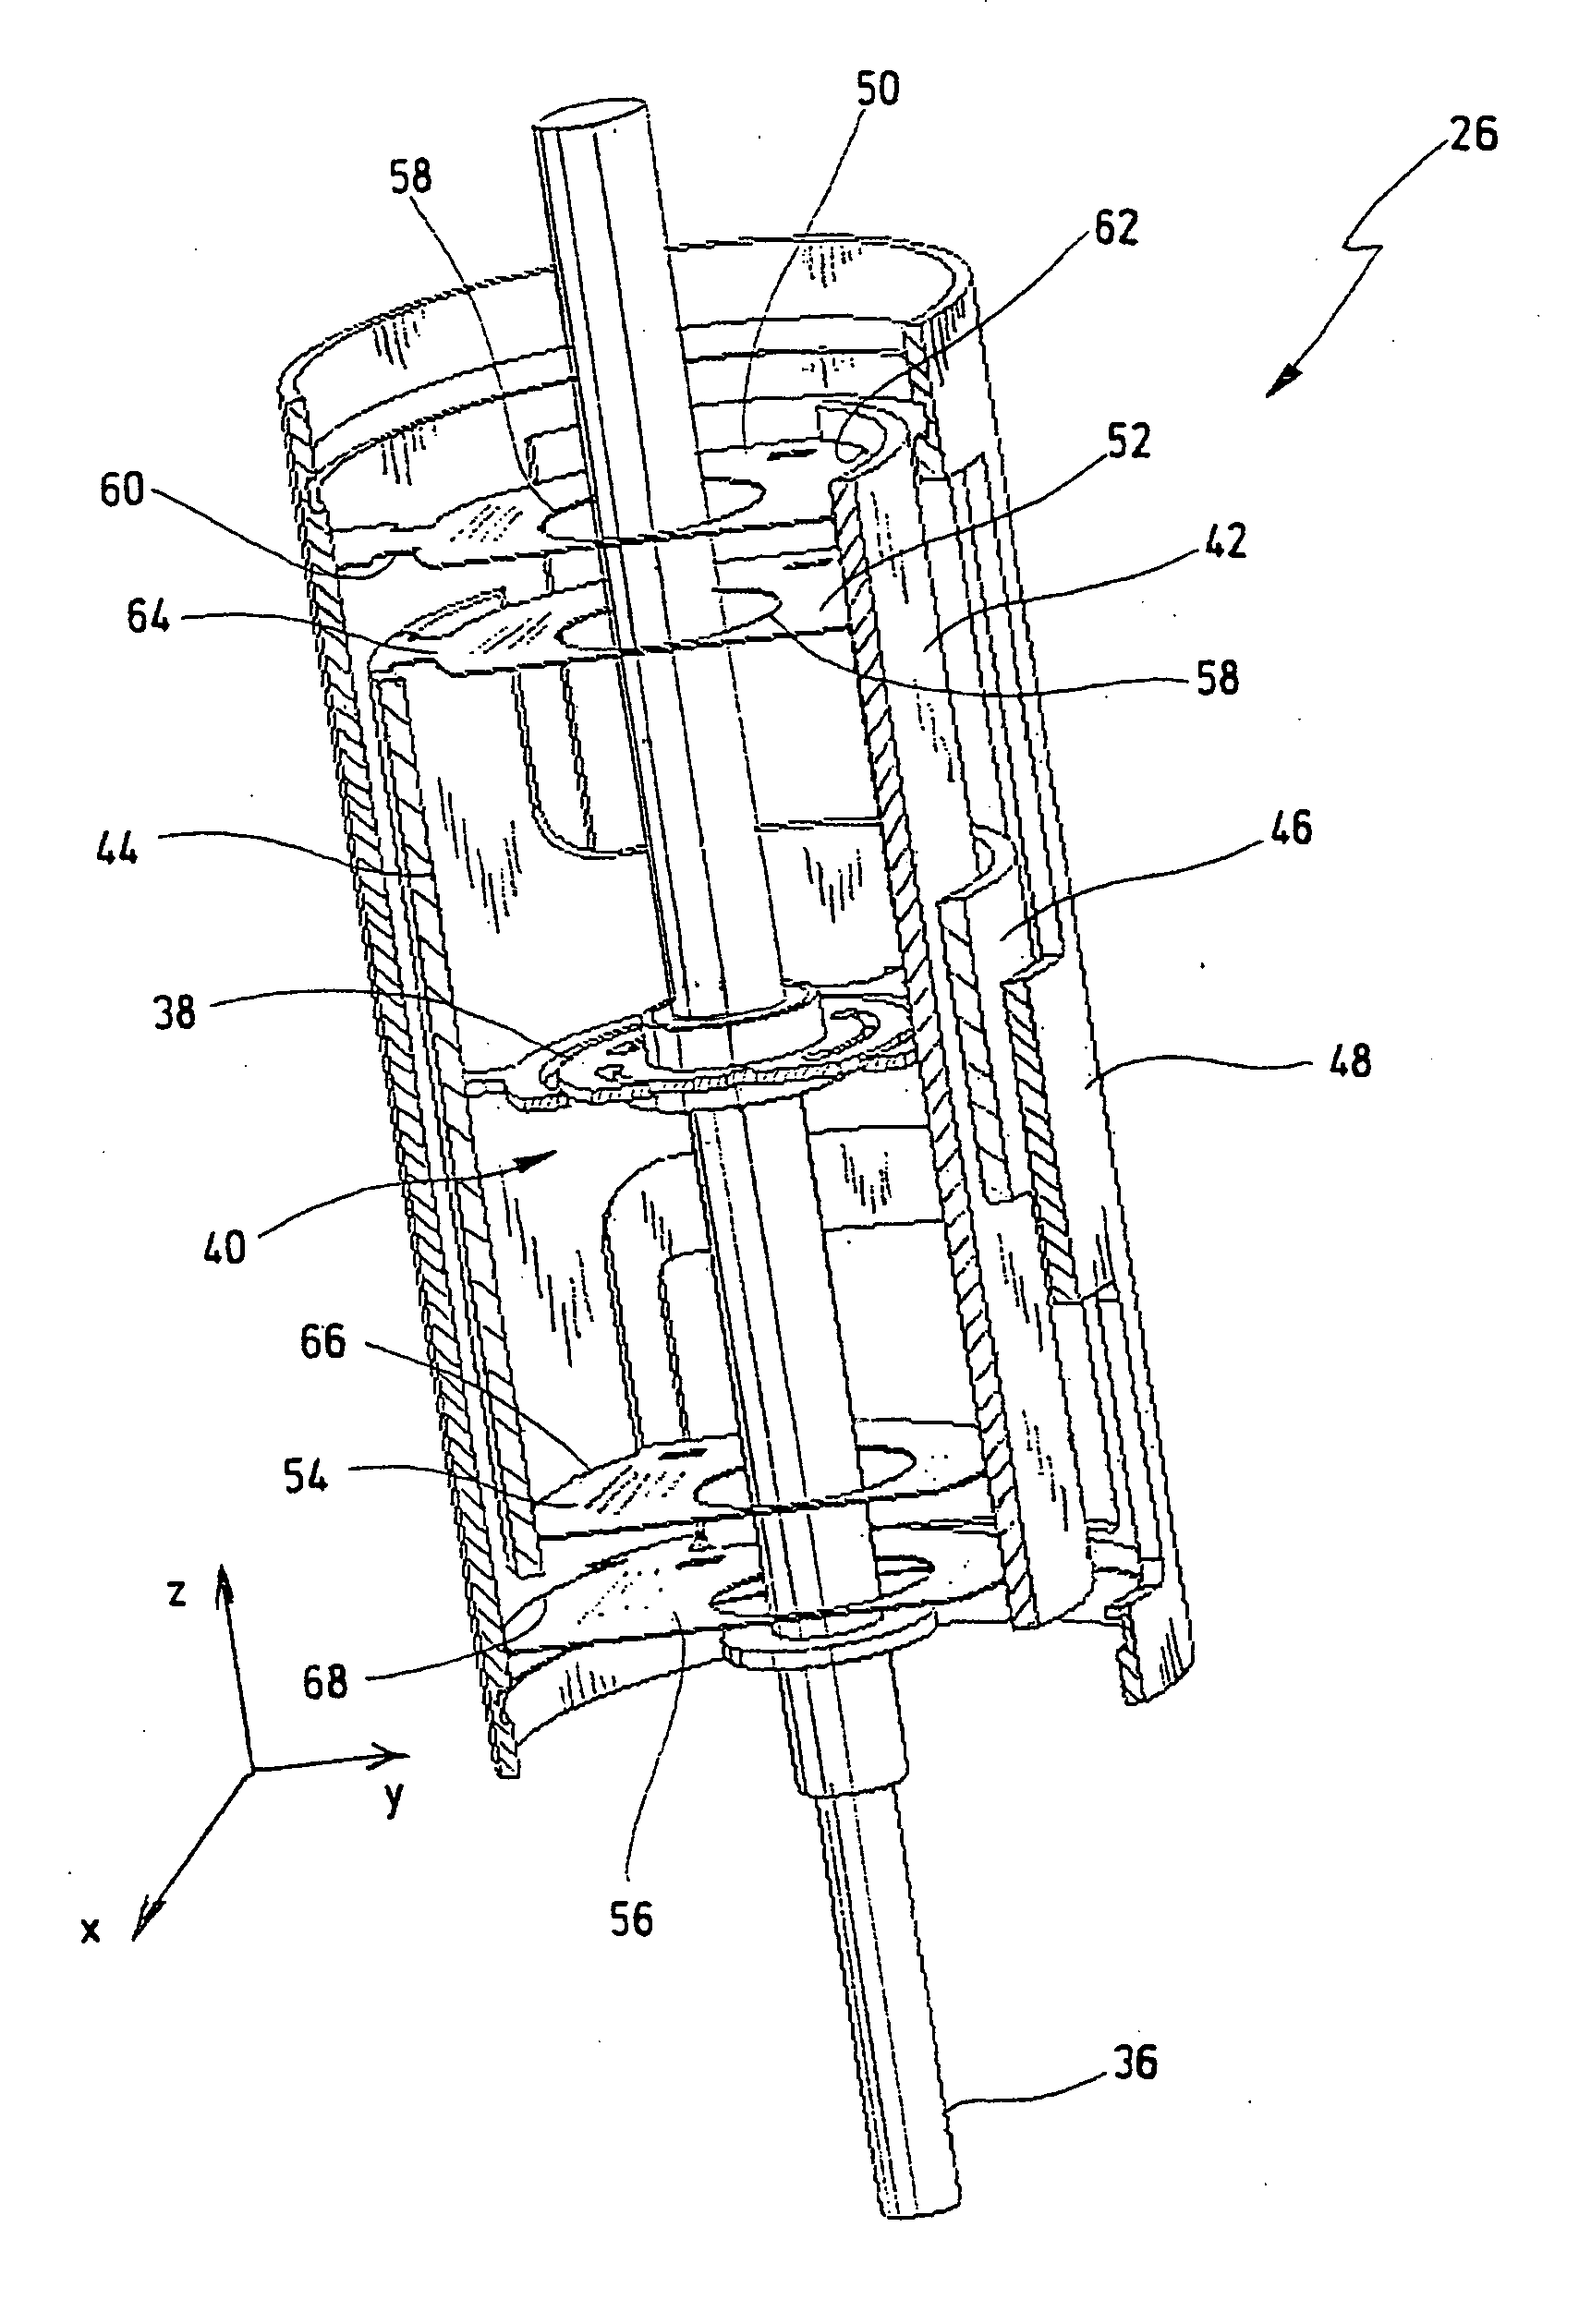 Probe for a coordinate measuring machine